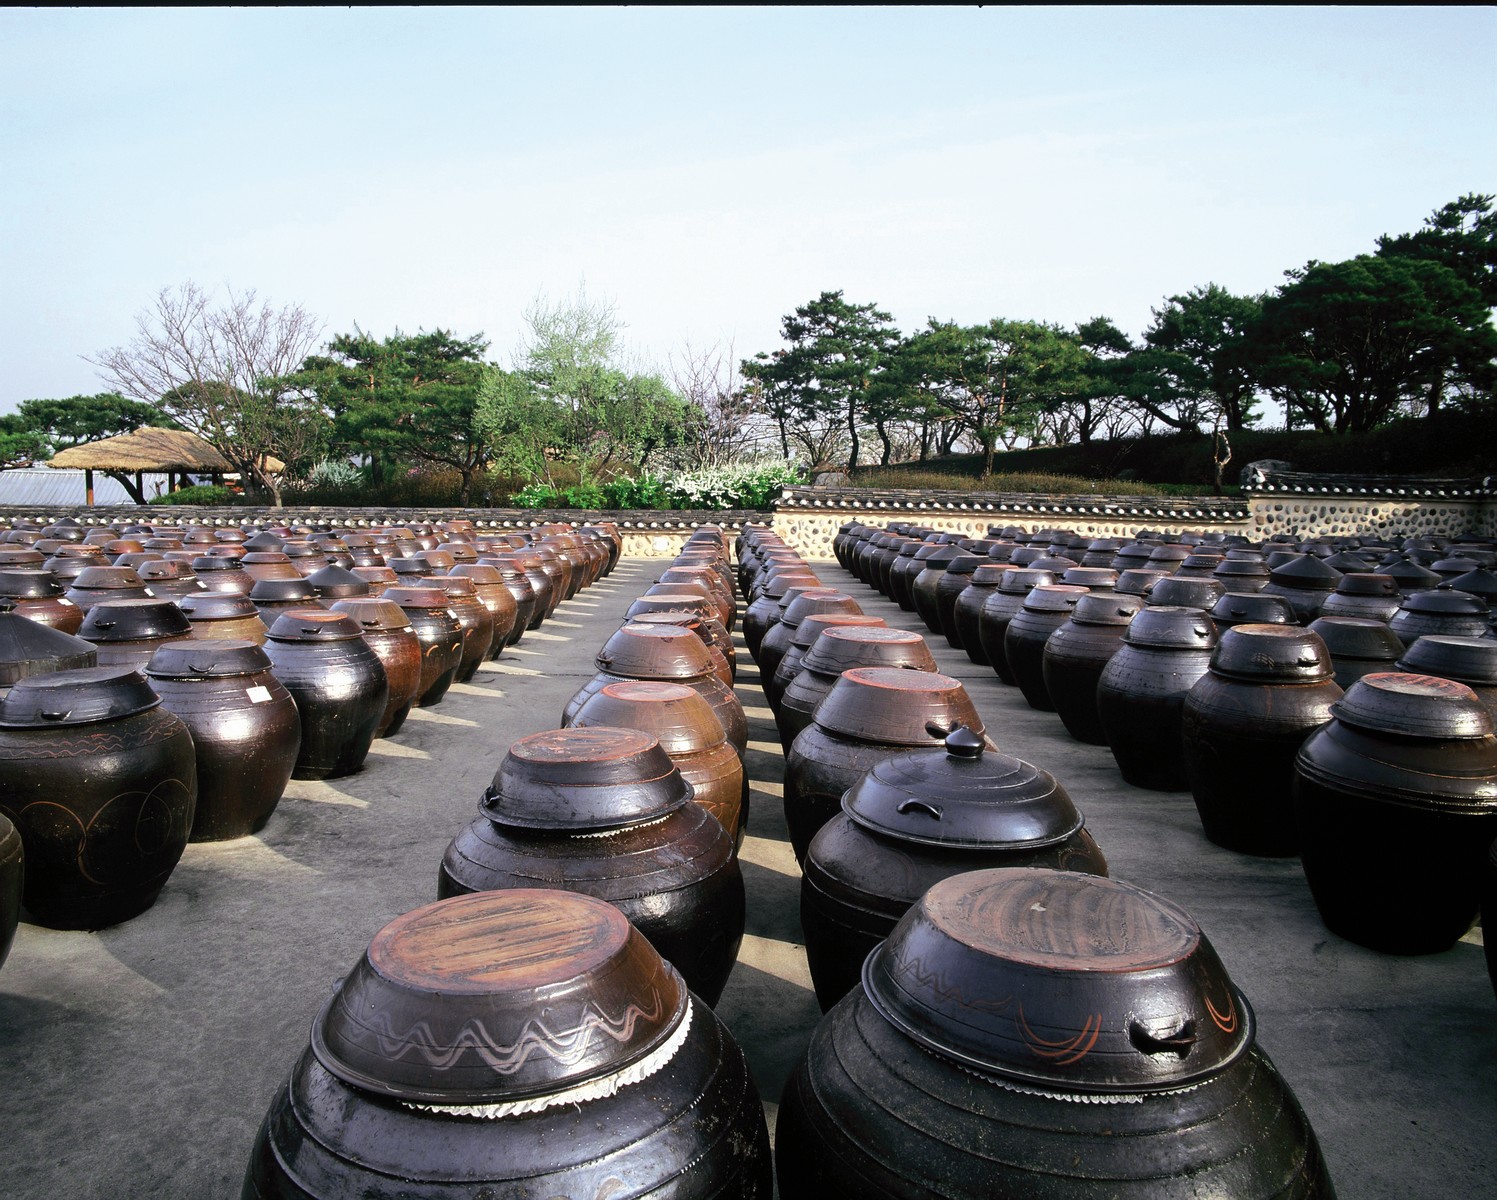 Jangdokdae (Soy Jar Terrace). An area outside the kitchen used to store large brown-glazed pottery jars containing soy paste, soy sauce, and chili paste. Korean pottery jars allow for proper ventilation, so they are perfect for preserving fermented food. The ideal location for Jangdokdae would be an area with sufficient sunlight and ventilation.